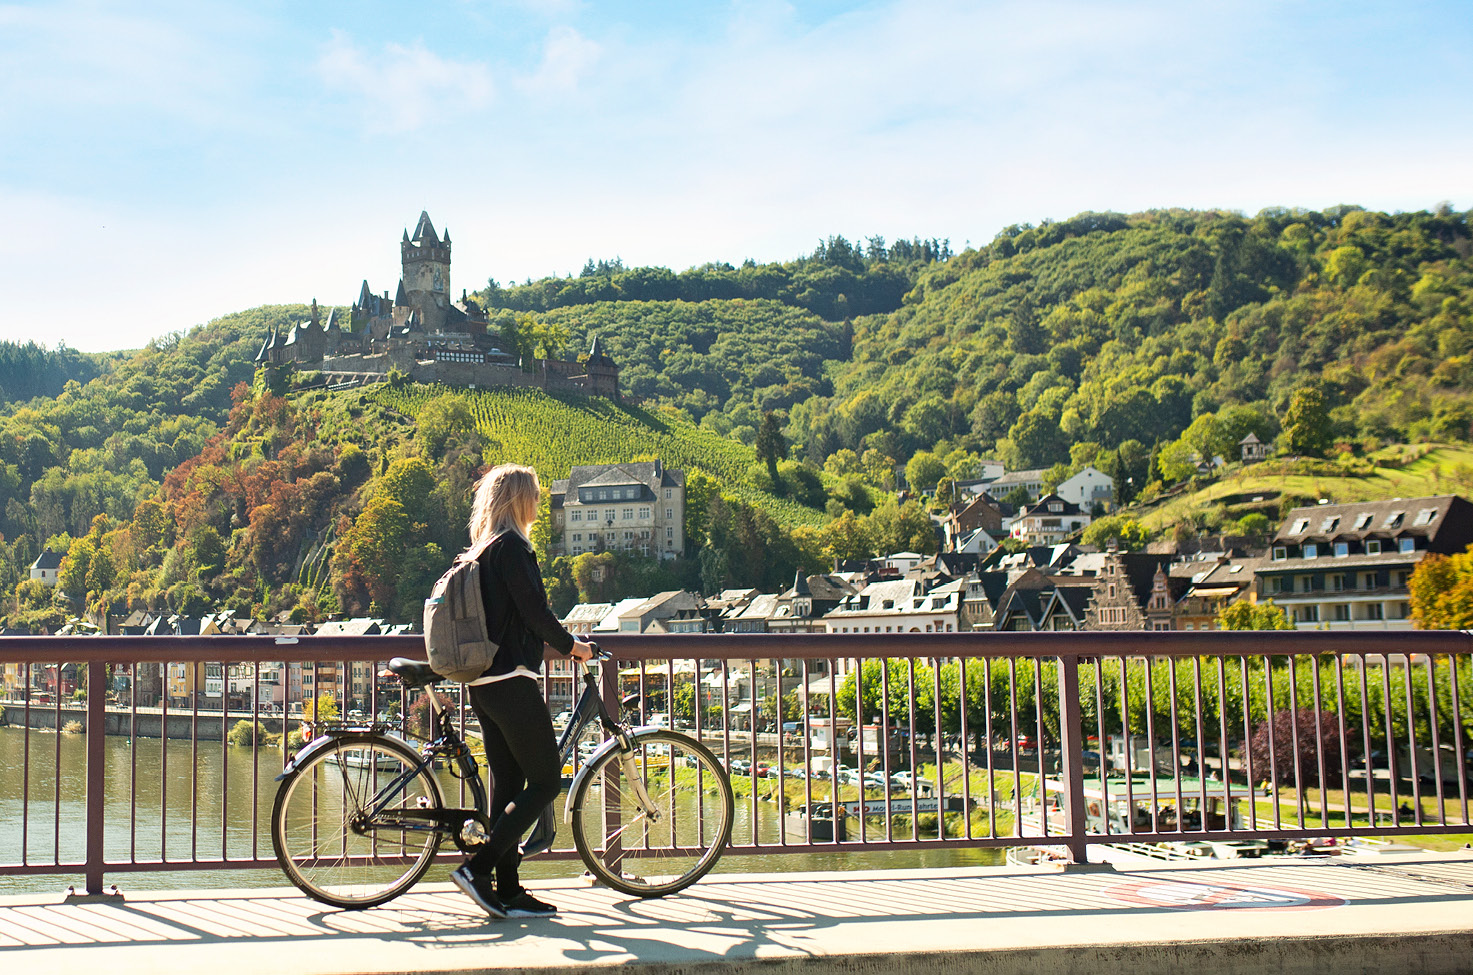 Guests enjoying a bike tour in Cochem, Germany, looking up at the castle at surrounding green trees